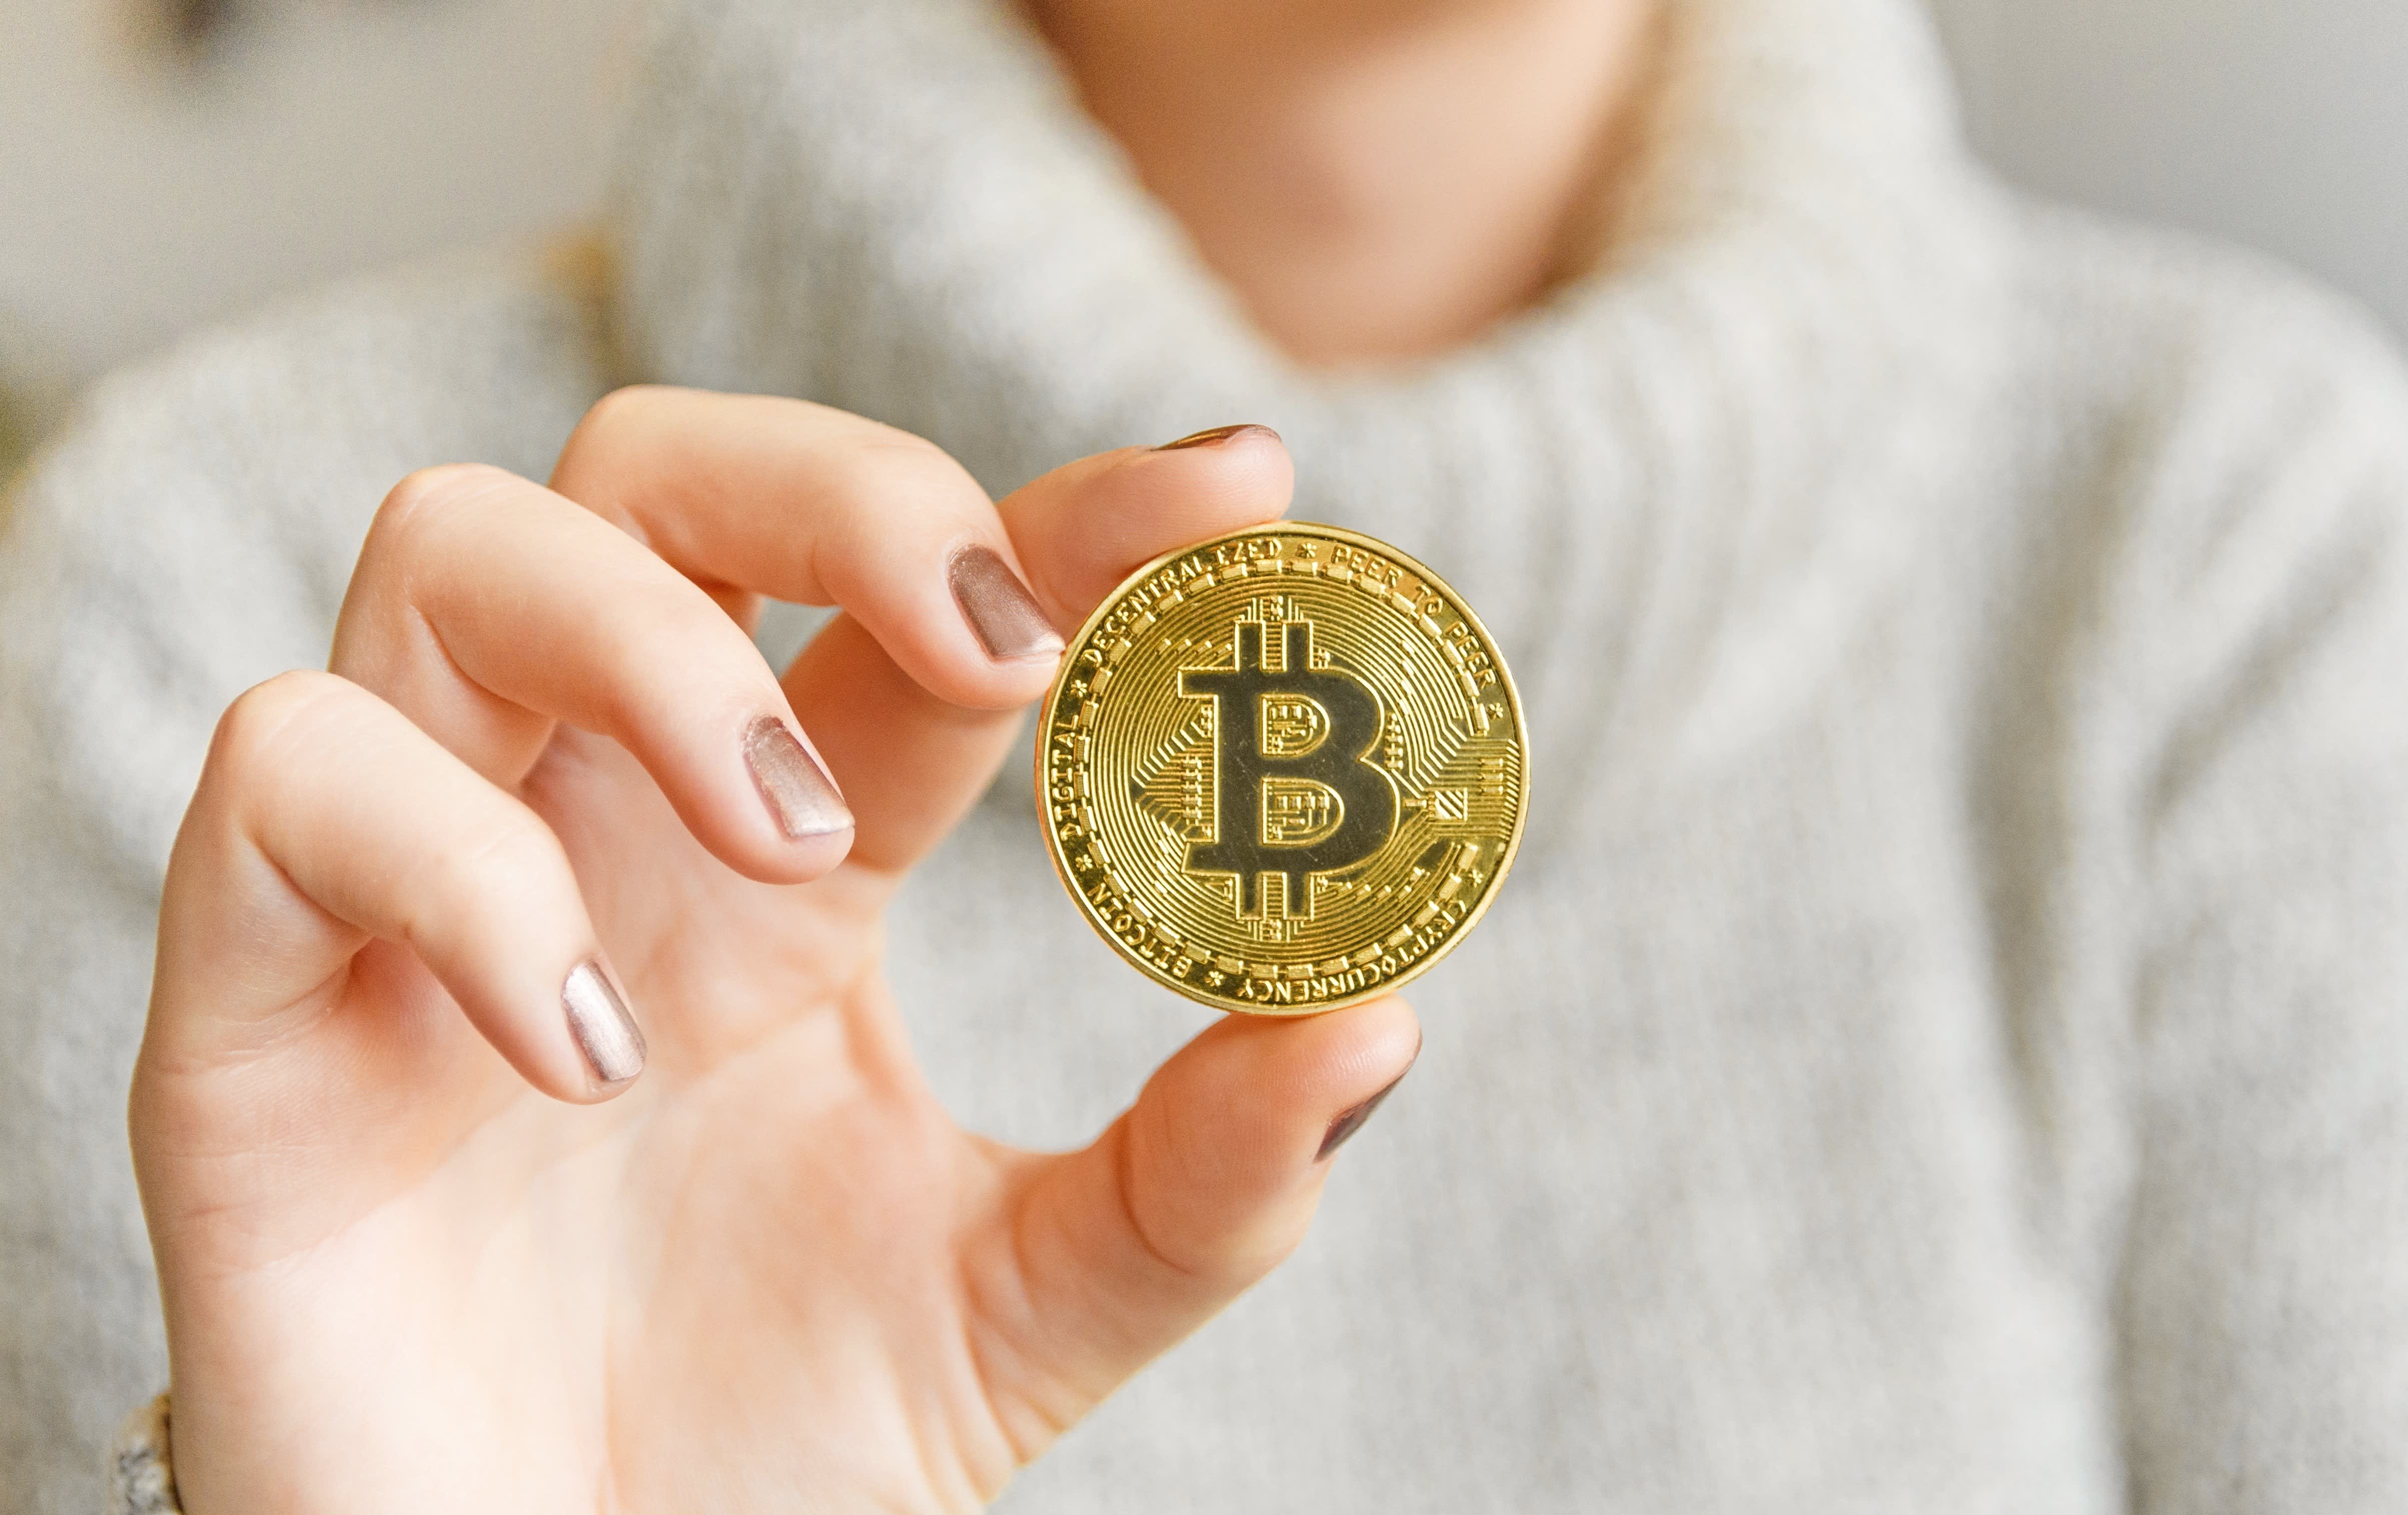 How to Make Money With Bitcoin - NerdWallet